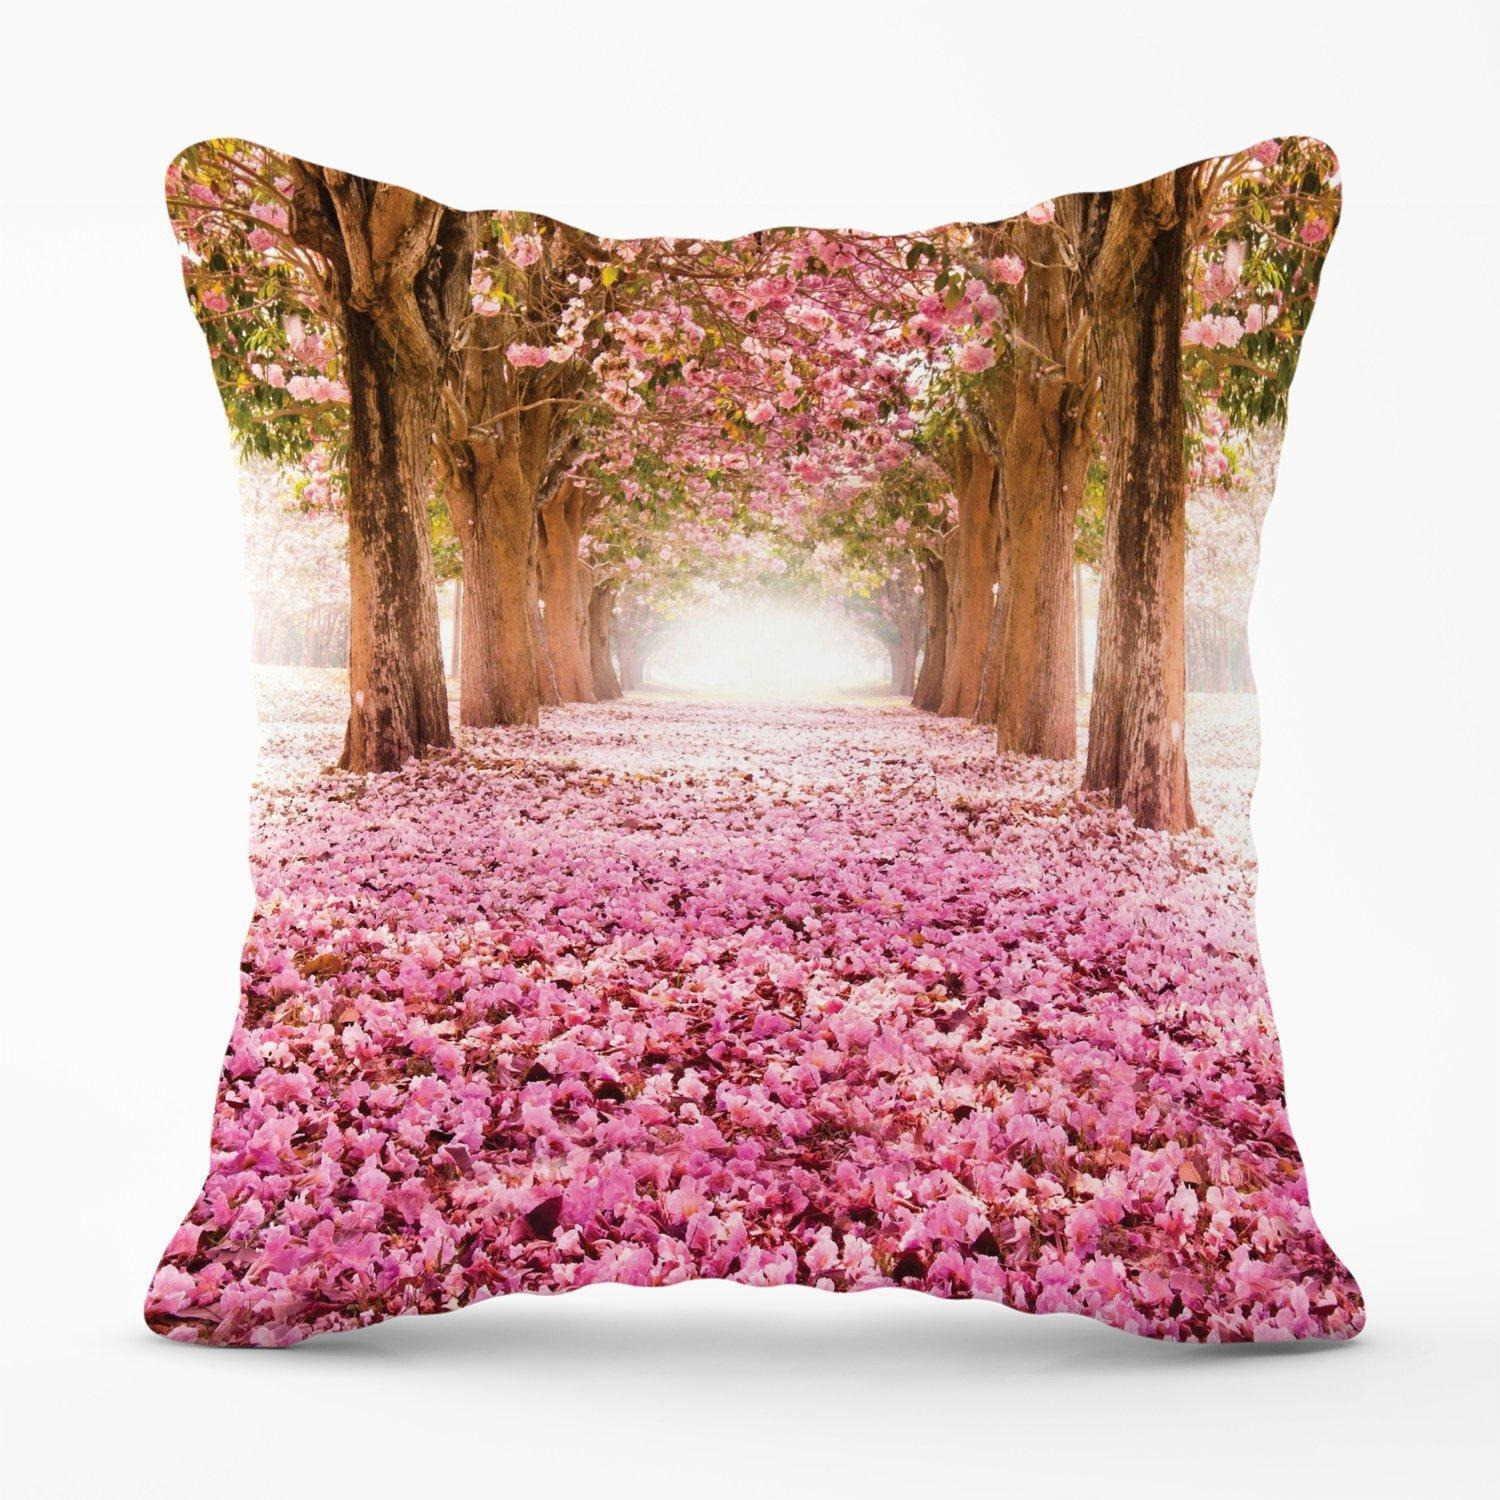 Pink Flower Tree Tunnel Outdoor Cushion - image 1